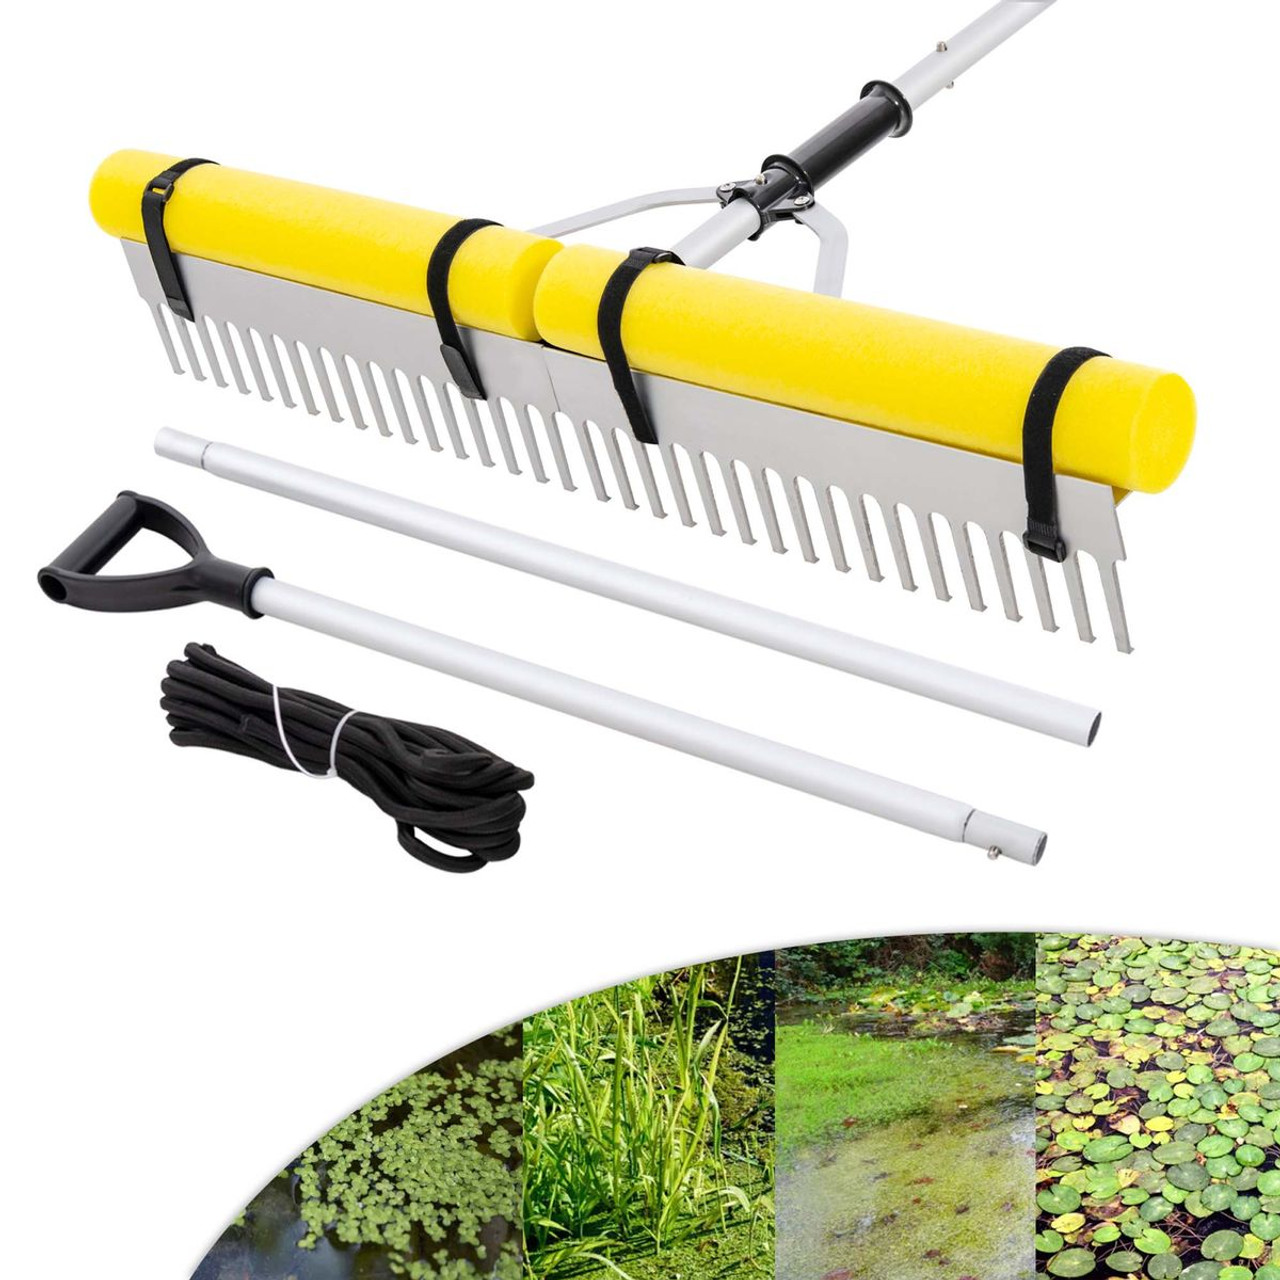 Costway 2-in-1 Floating Aquatic Weed Cutter Rake with Foam Floats product image